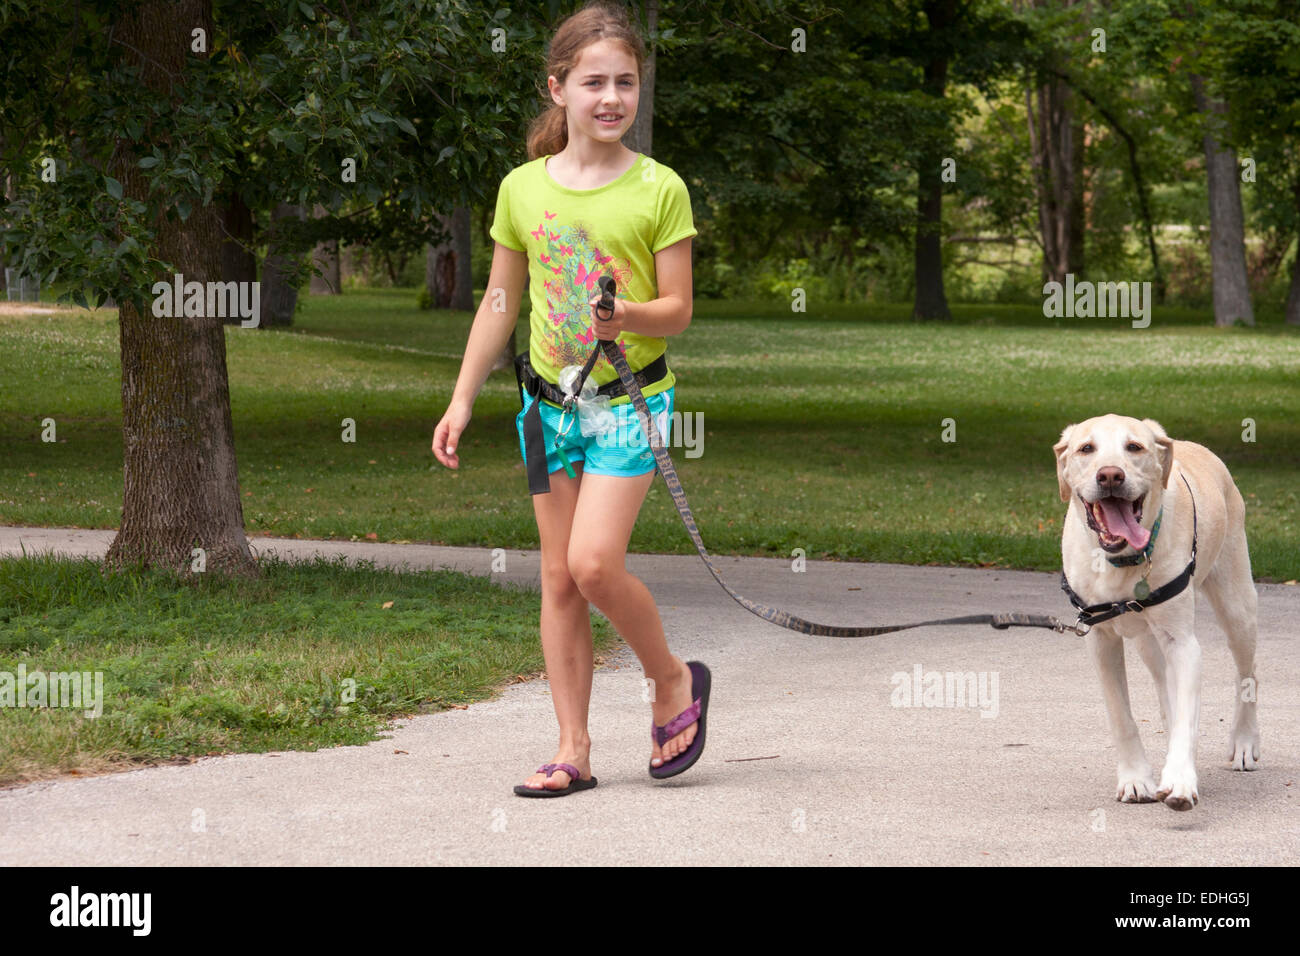 A young girl with her Labrador dog going for a walk in a park Stock Photo